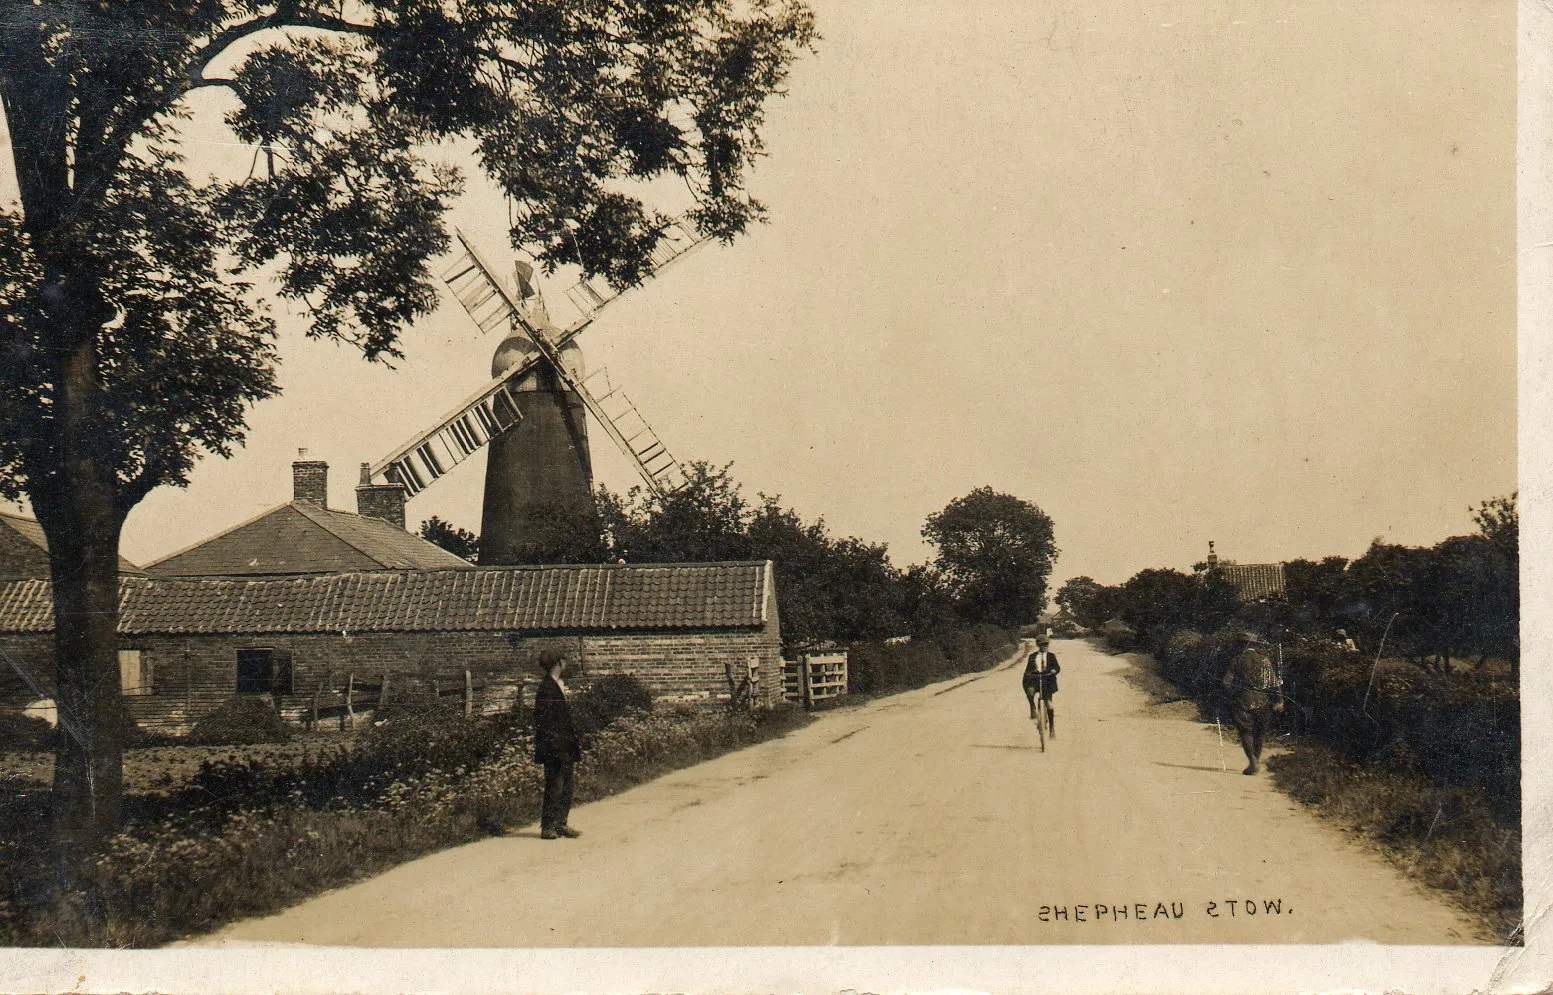 Photo showing: Drove Road, Shepeau Stow, Lincolnshire, with Lawson's Mill on the left. Postcard postmarked 1921. Publisher not identified.